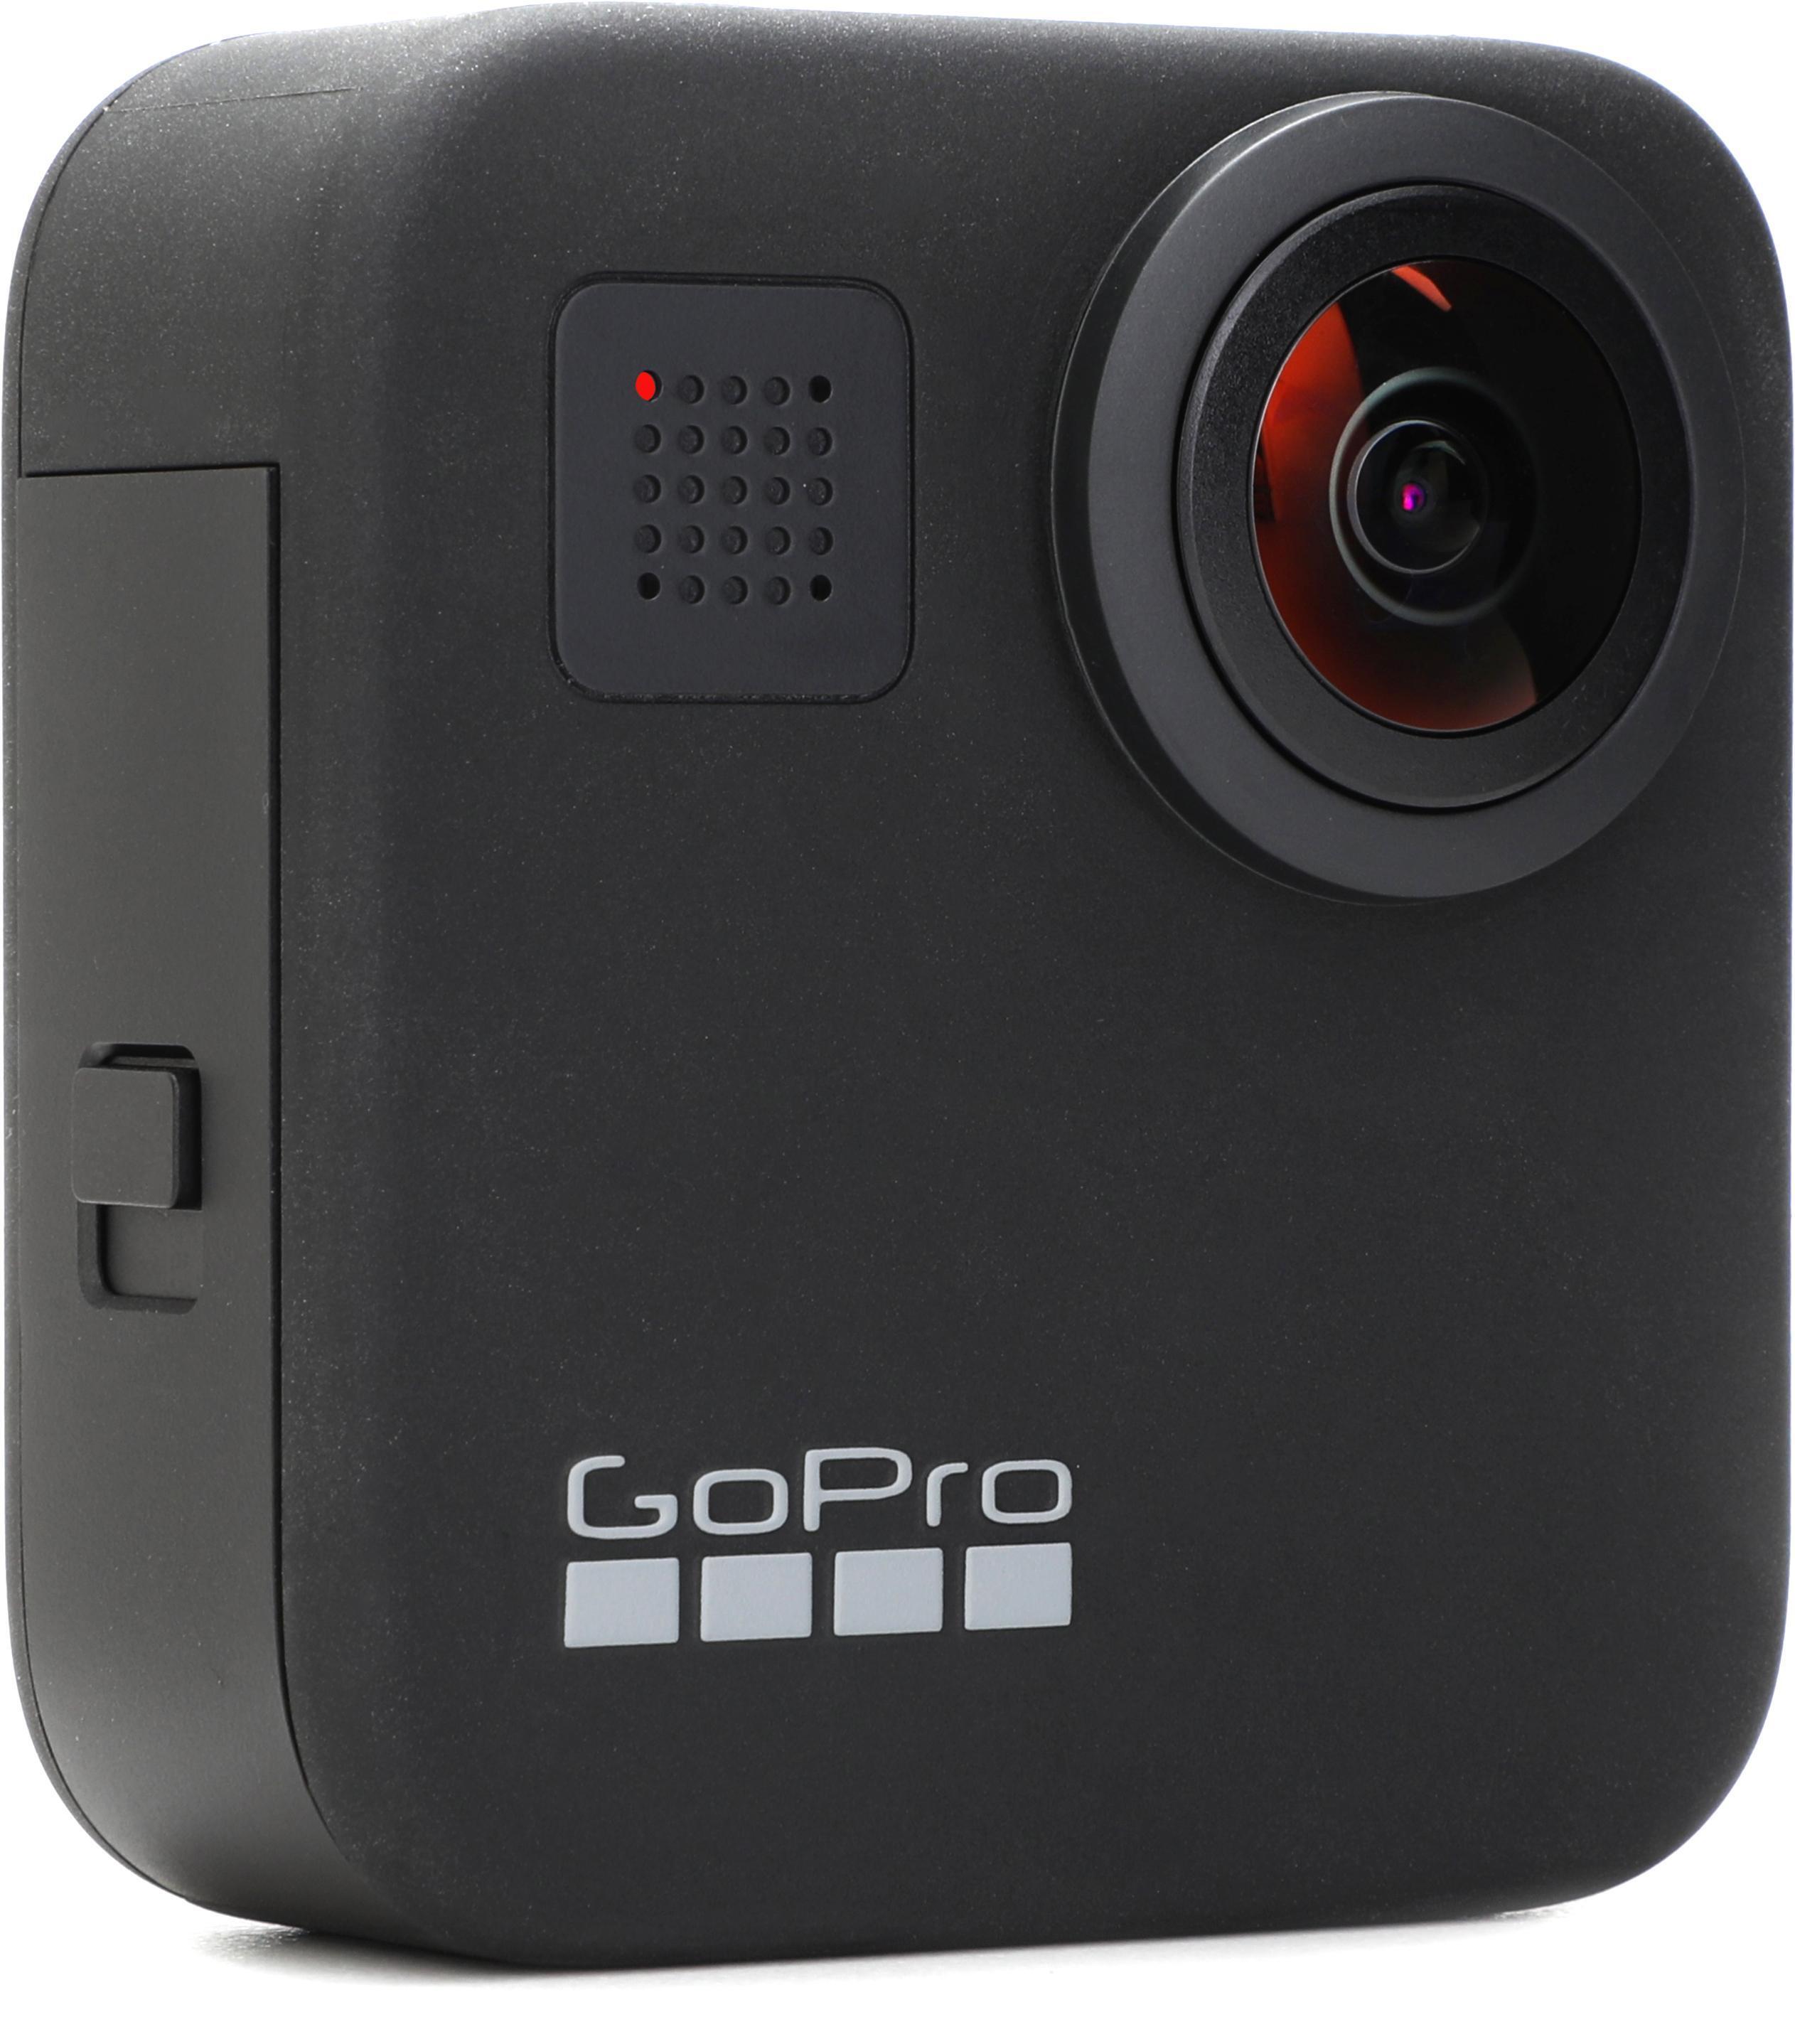  GoPro MAX — Waterproof 360 + Traditional Camera with Touch  Screen Spherical 5.6K30 HD Video 16.6MP 360 Photos 1080p Live Streaming  Stabilization : Electronics